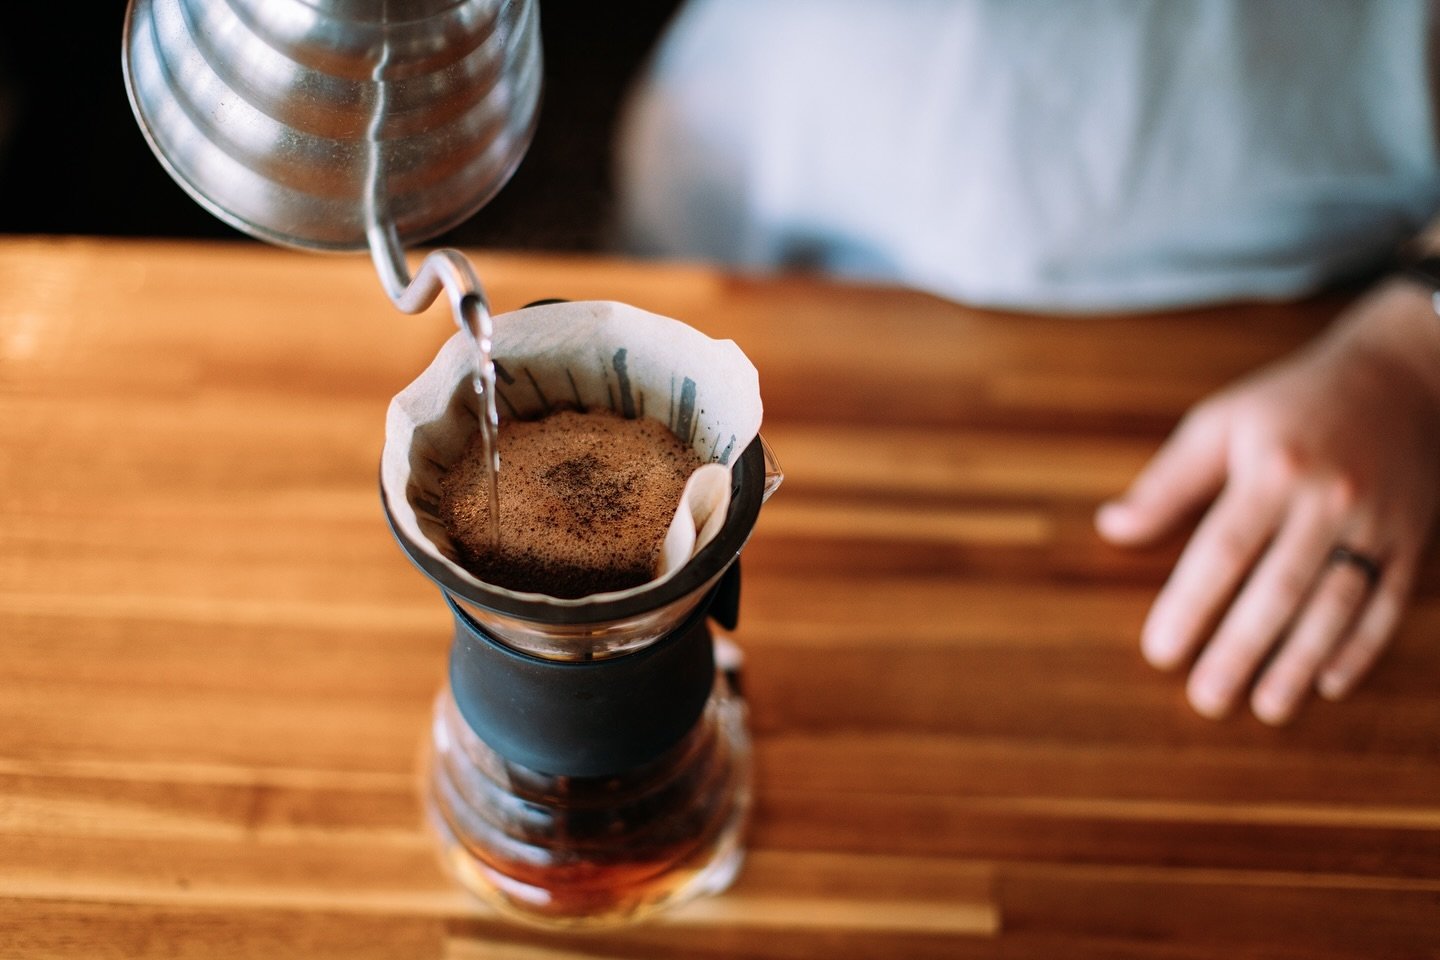 If our slow bar is more your vibe, try our Ethiopian light roast on pour-over, or our fan-favorite Queen Anne&rsquo;s Revenge dark roast blend on french press  and sit a while!
.
.
.
#coffee #coffeeshop #local #shoplocal #localcoffee #localcoffeeshop